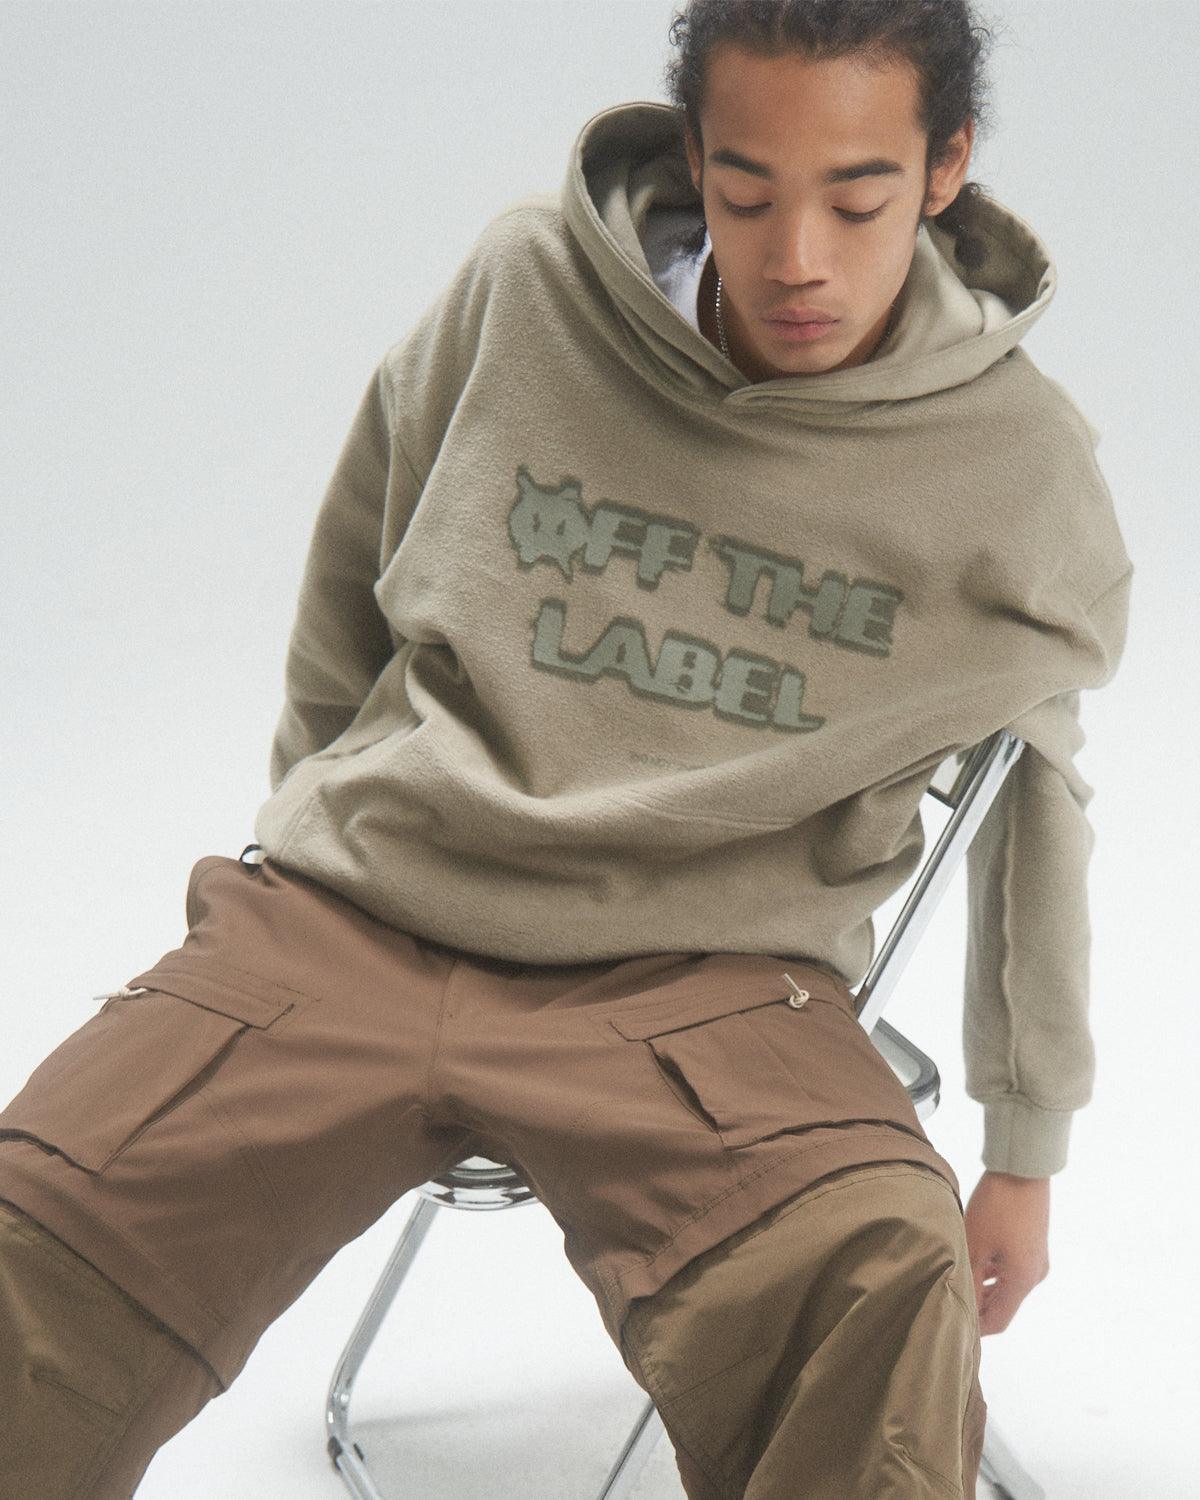 TAKA ORIGINAL LIMITED - [Welcome Special] Off The Label olive green reversible hoodie